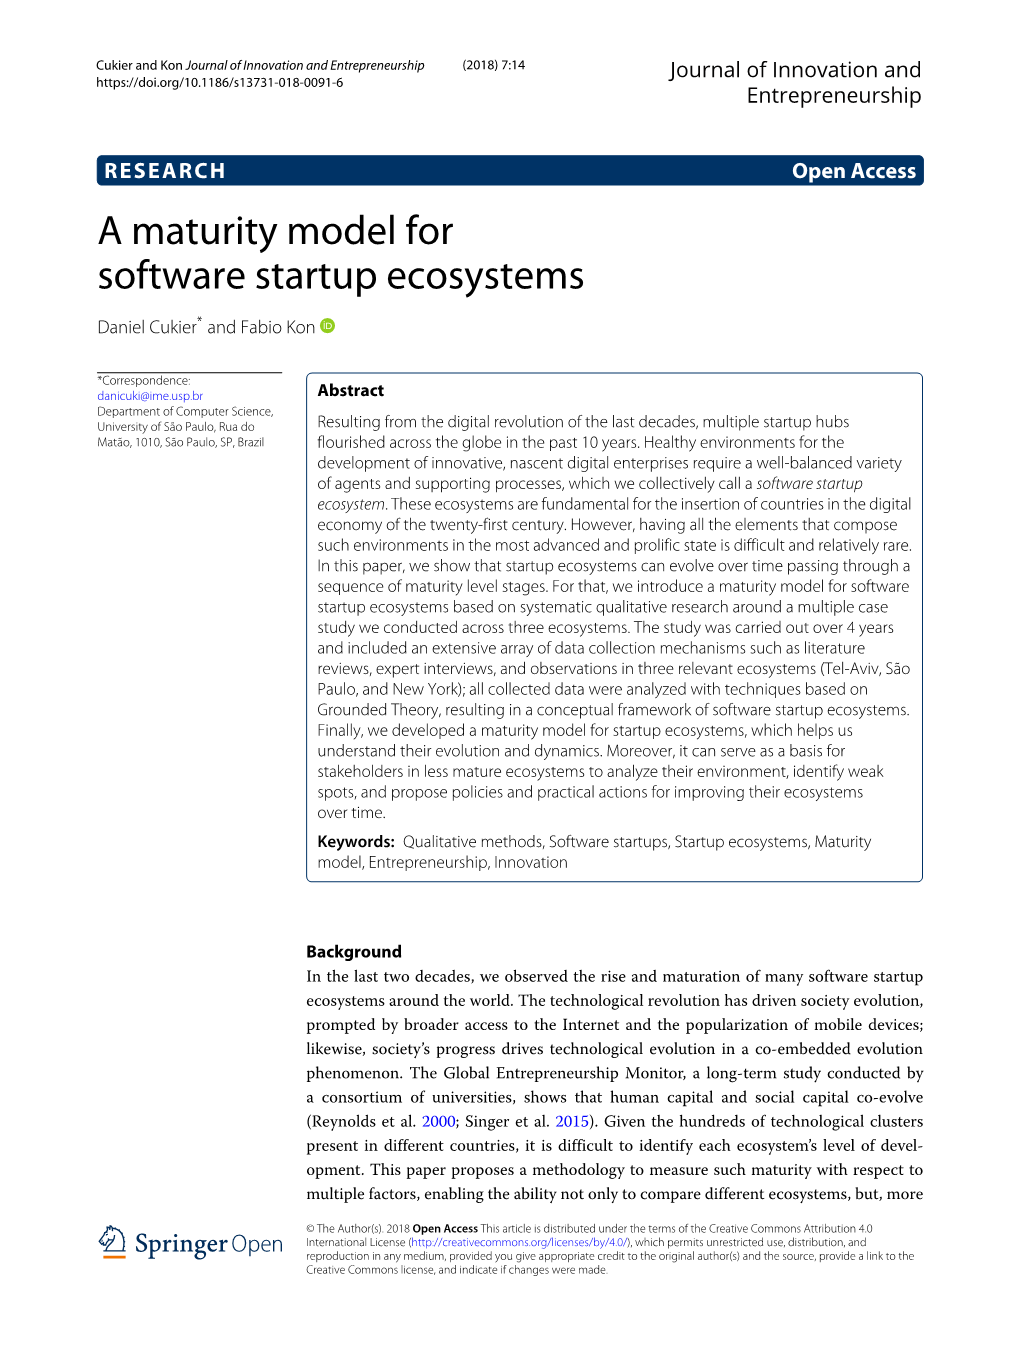 Software Startup Ecosystems Maturity Model, 1–12